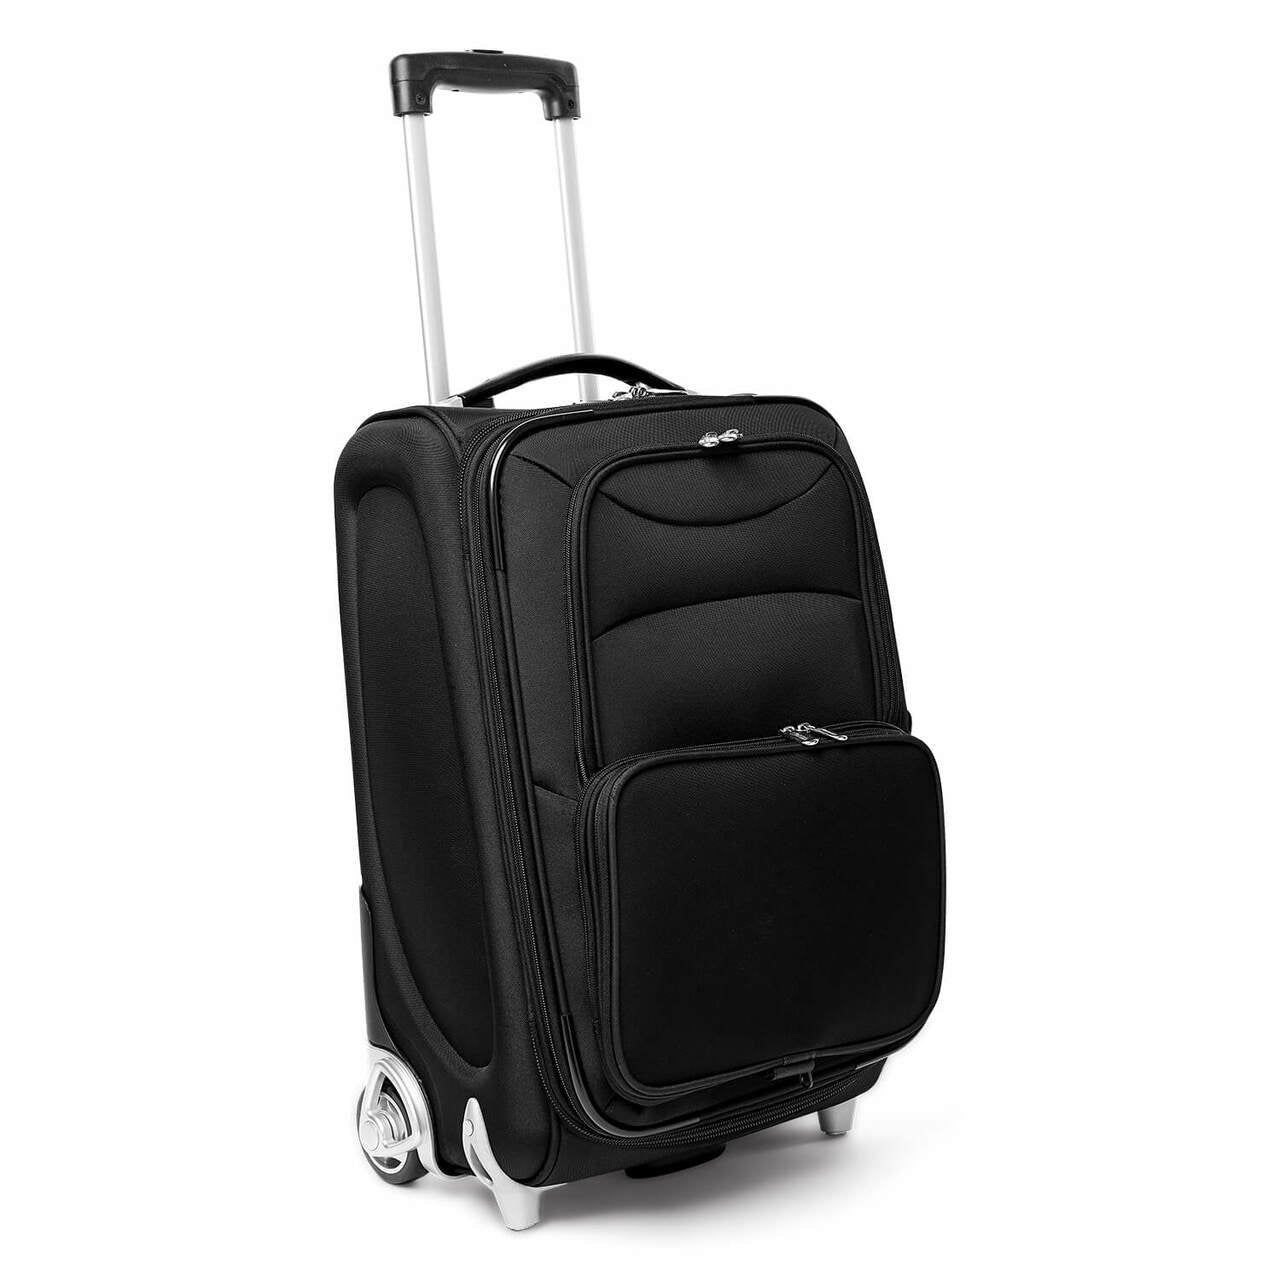 Providence Carry On Luggage | Providence College Rolling Carry On Luggage